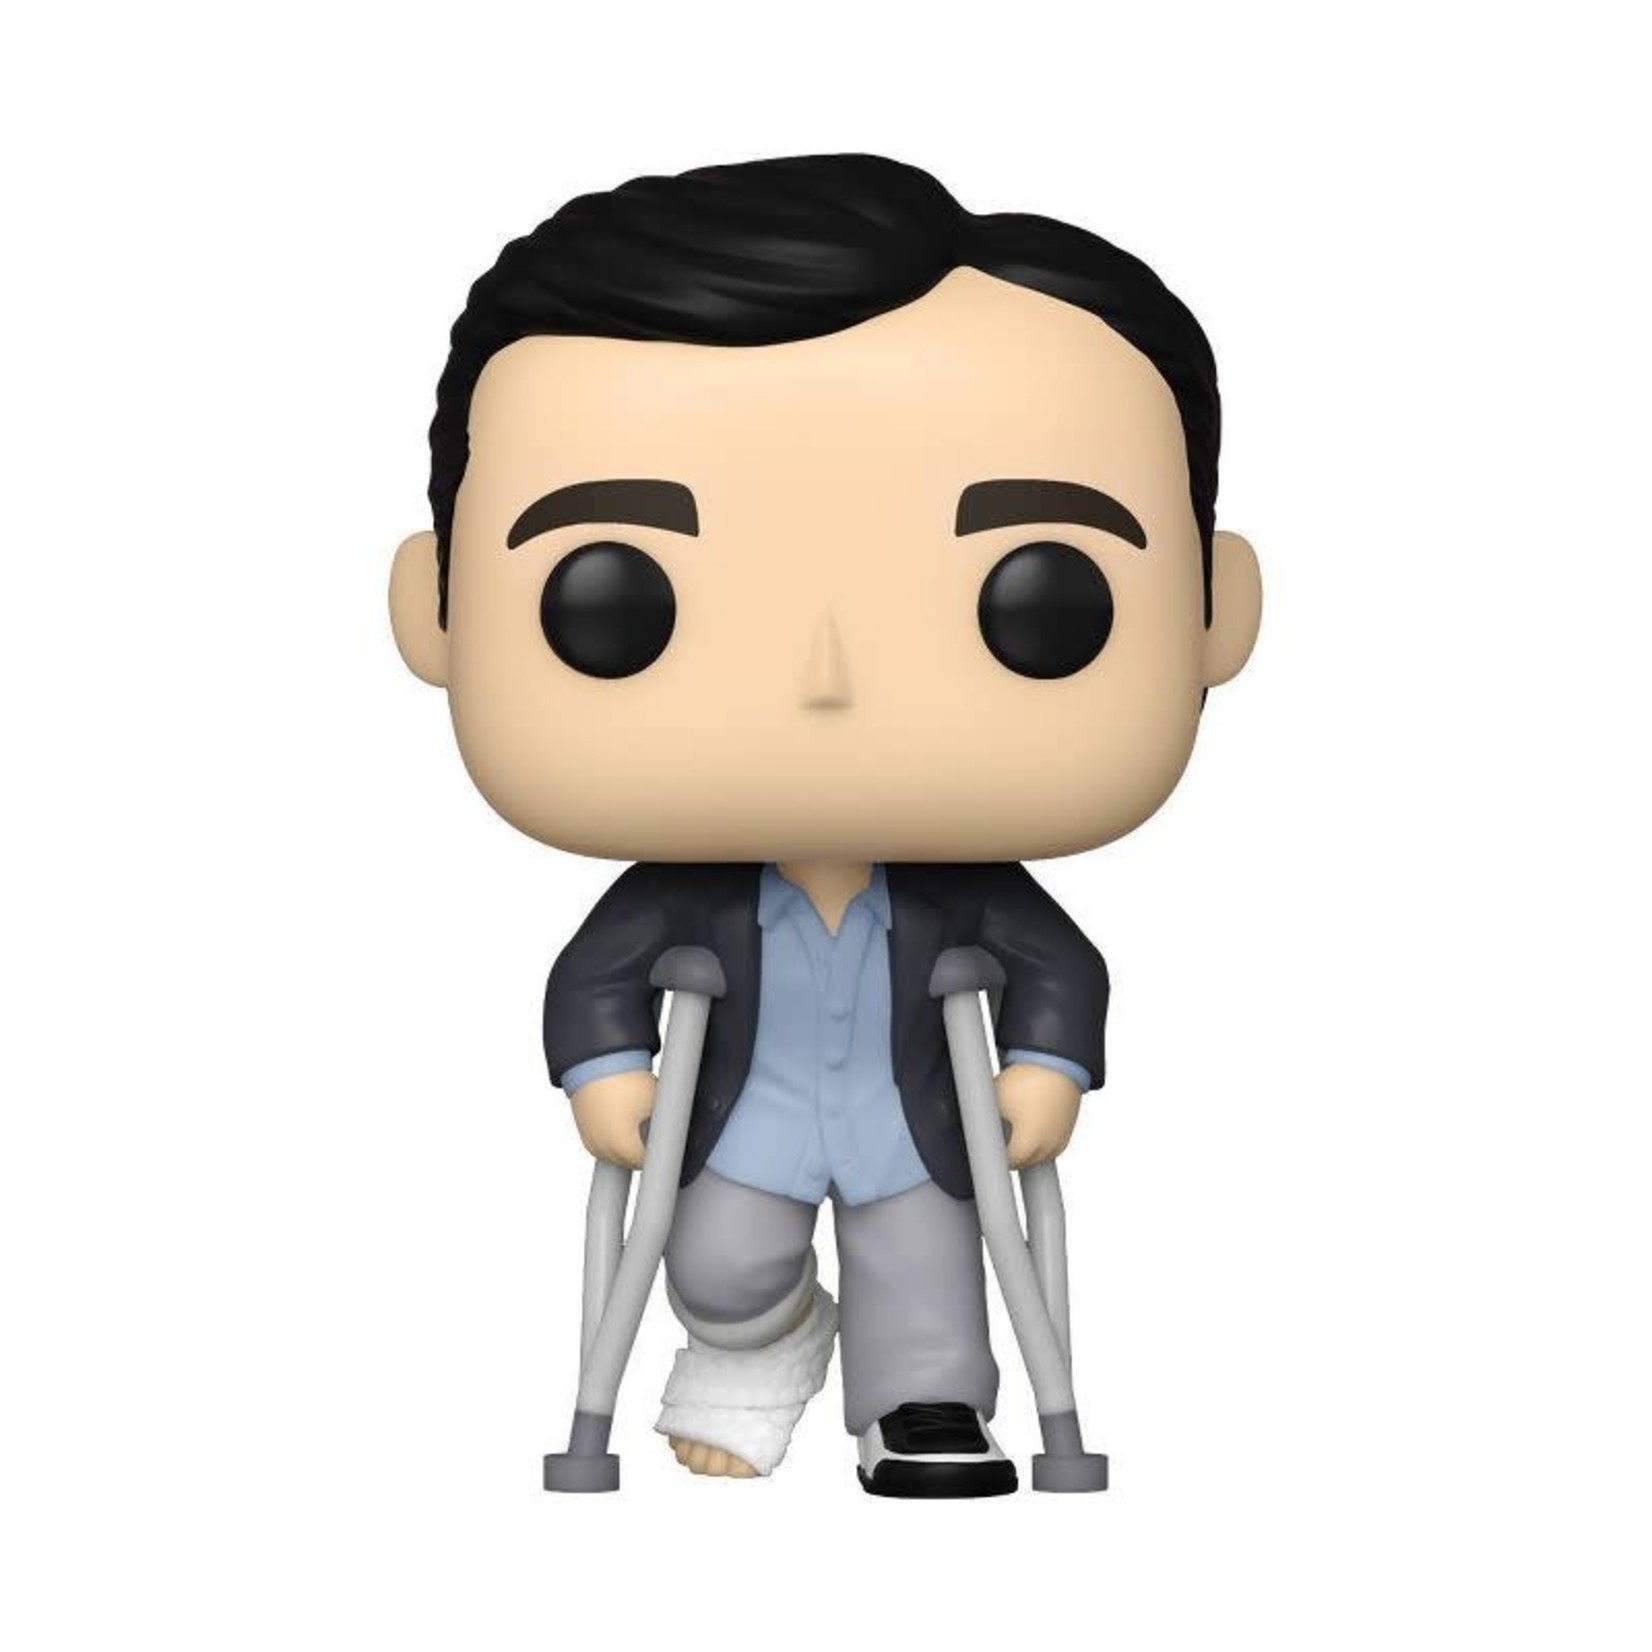 Funko Funko POP! TV: The Office - Michael Standing with Crutches